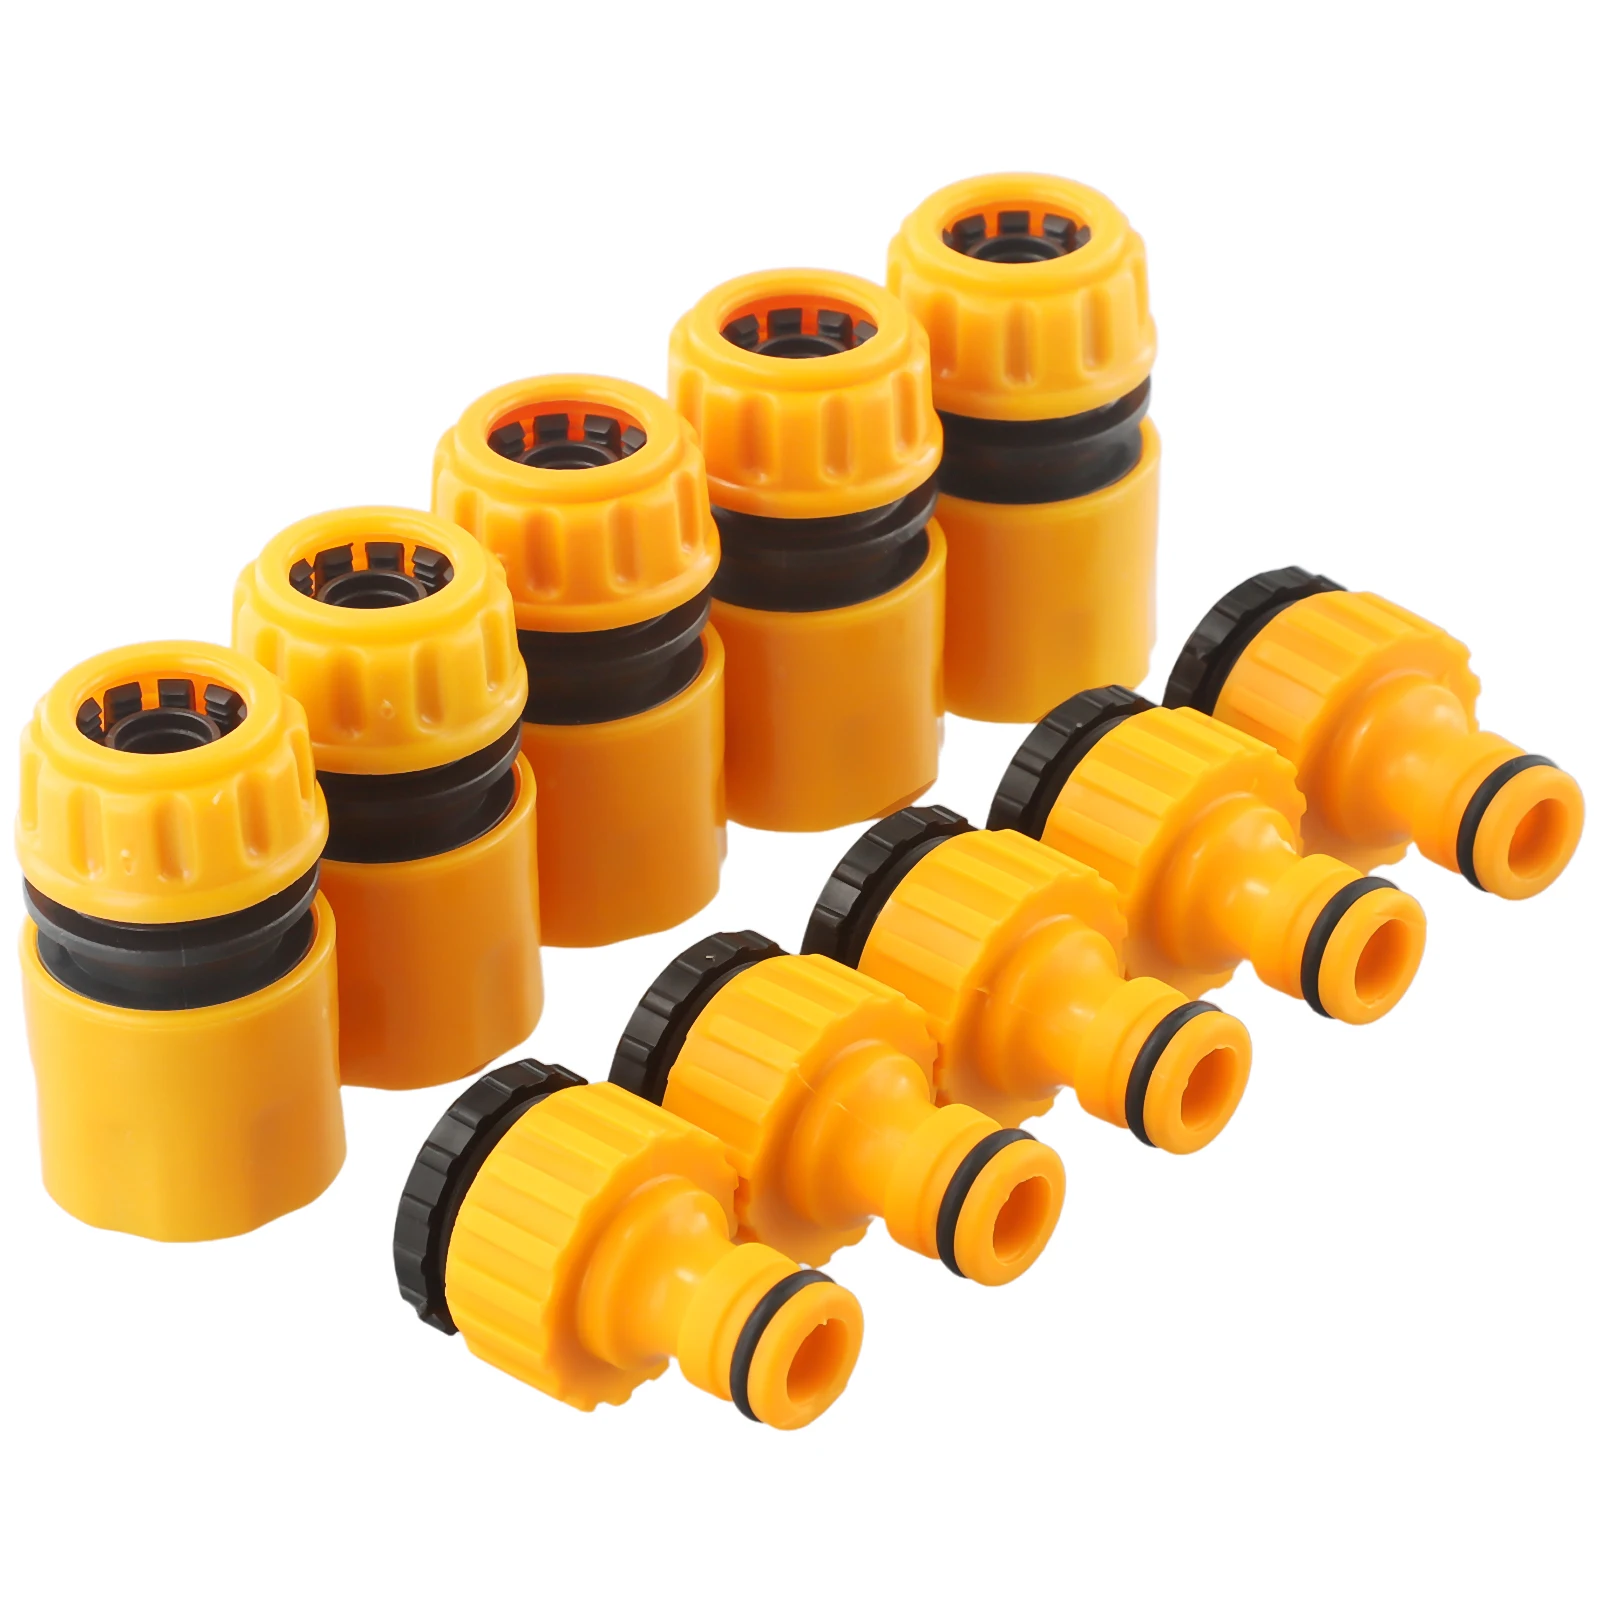 

10pcs 3/4 & 1/2 Inch Garden Hose Water Tap Threaded Connector Faucet Adapter Quick Fitting Irrigation Water Connectors